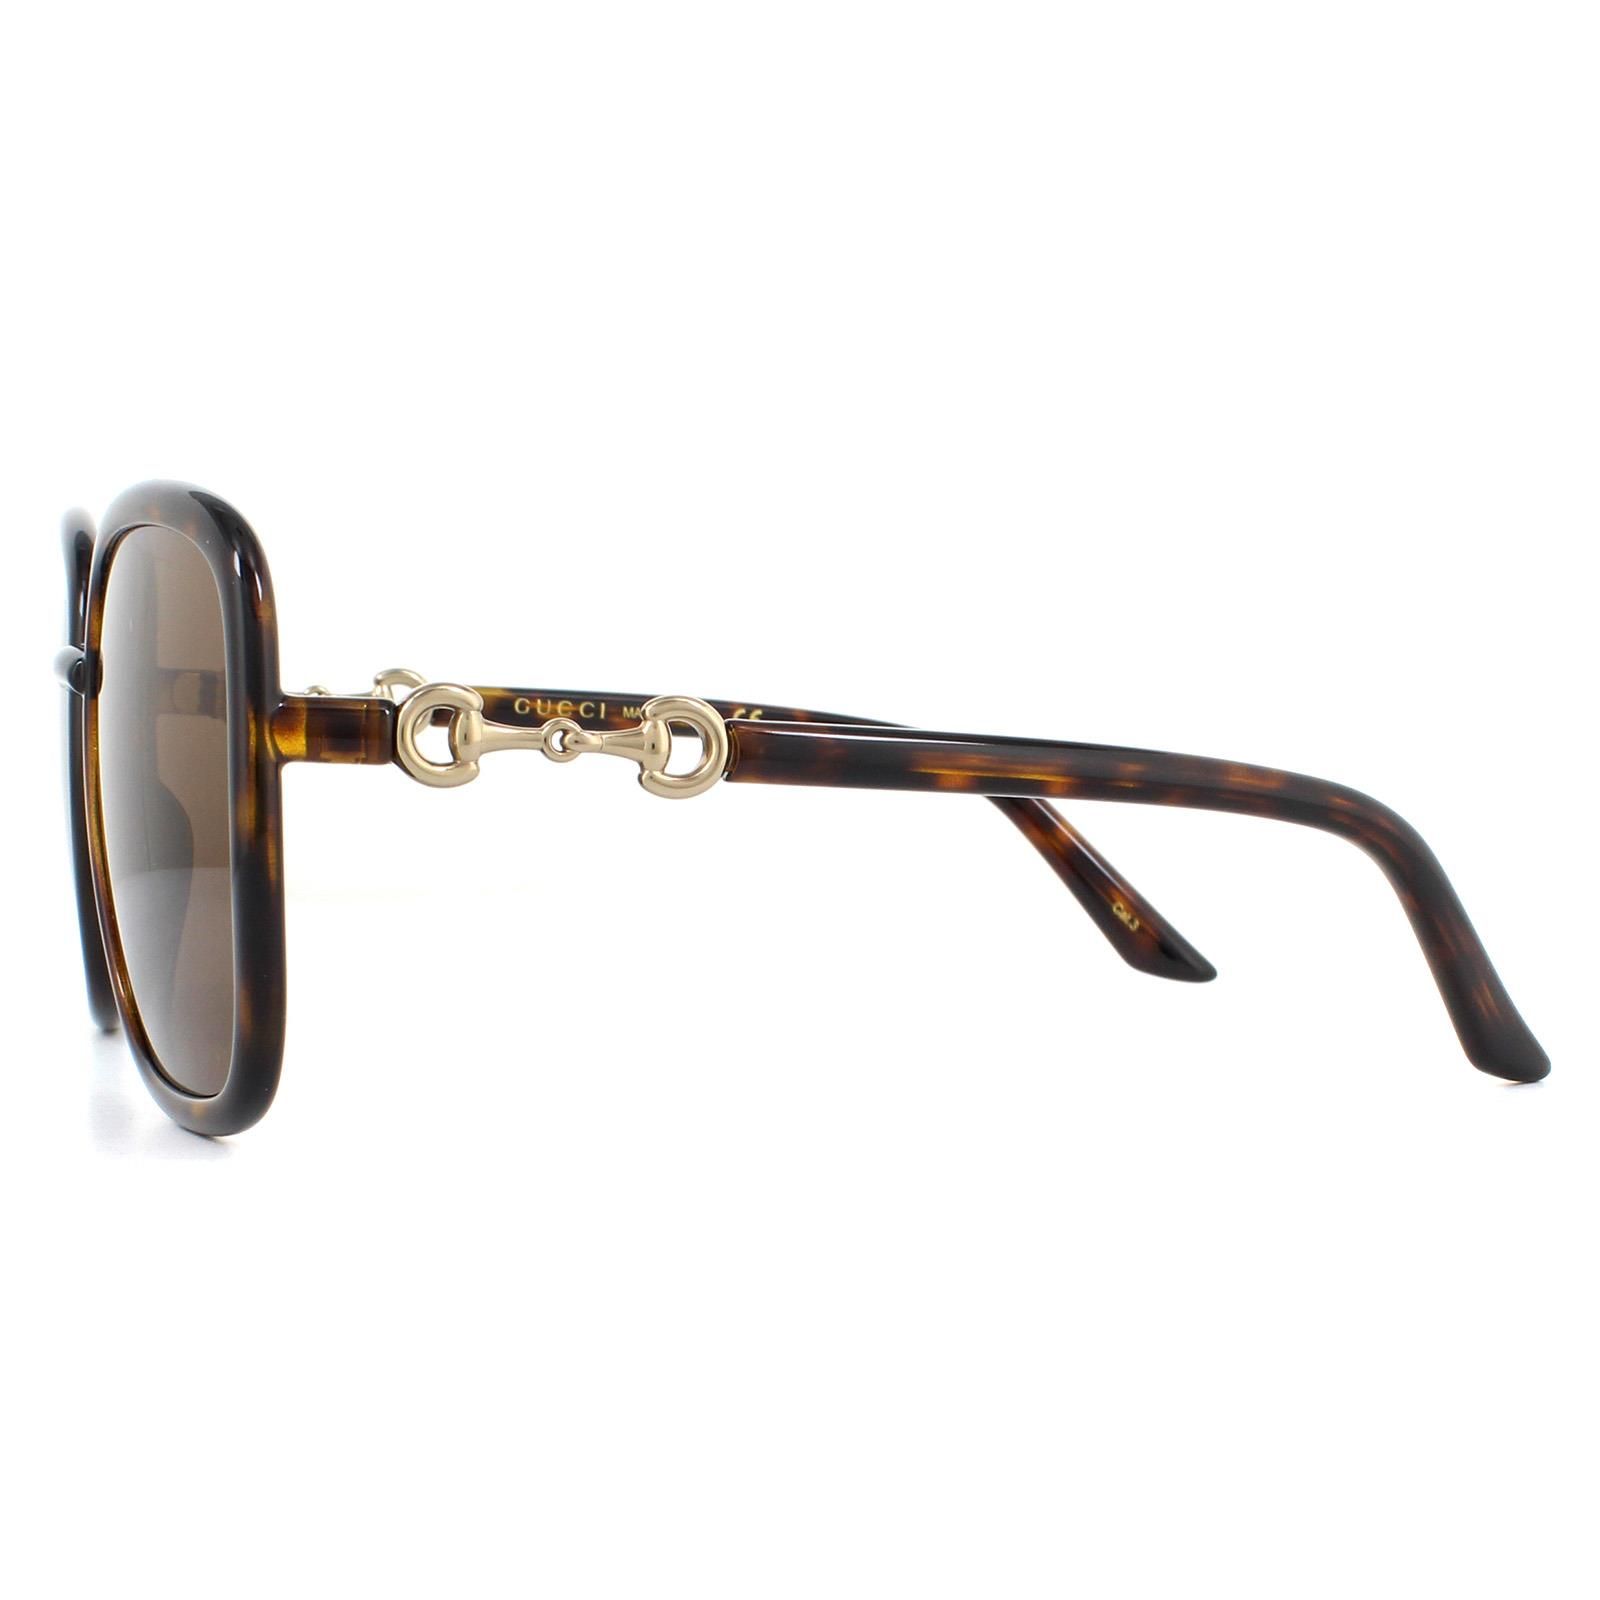 Gucci Sunglasses GG0893S 002 Dark Havana Brown are a simple square style for women crafted from lightweight acetate. The sophisticated design is ultra feminine and flattering for most faces. Finished with Gucci's iconic horsebit design on the hinges and signed off with the Gucci text logo on the inside of the right temple.